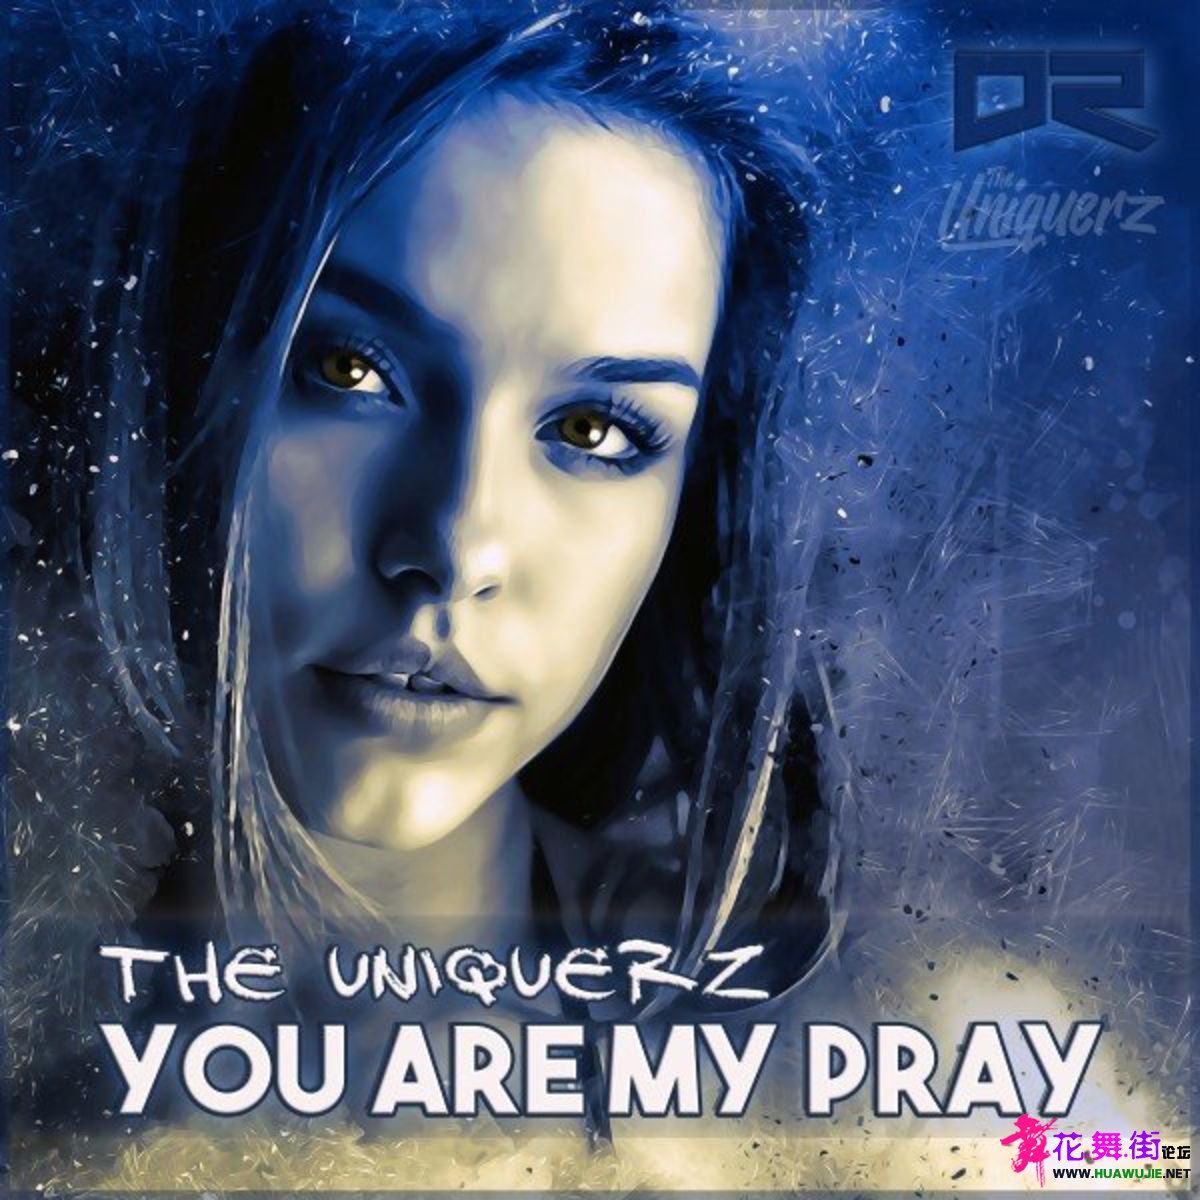 00-the_uniquerz-you_are_my_pray-cover-2021_int.jpg